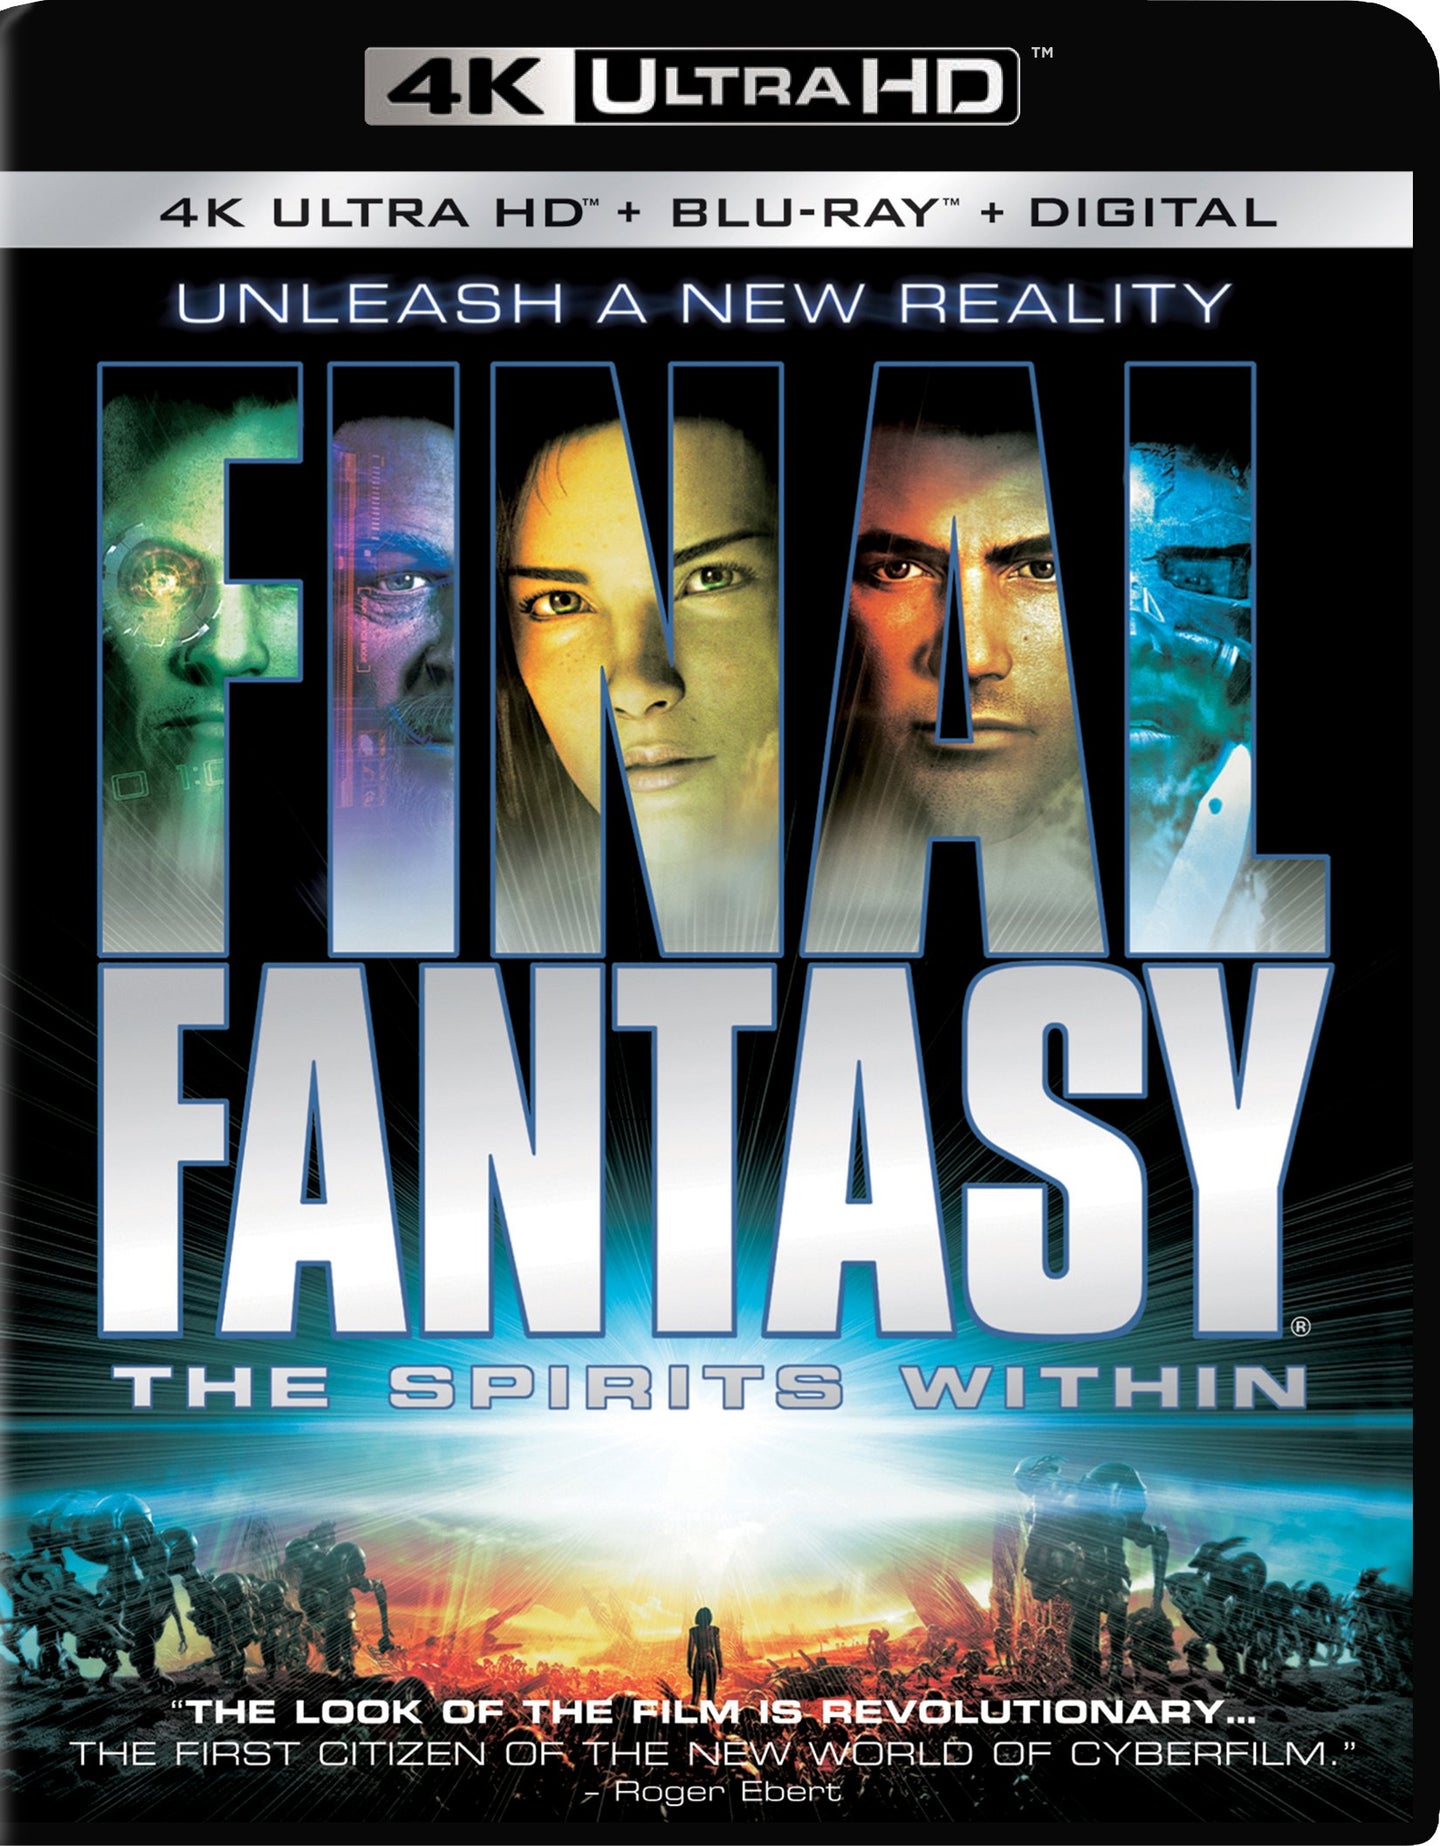 Final Fantasy: The Spirits Within (2001) Movies Anywhere 4K code